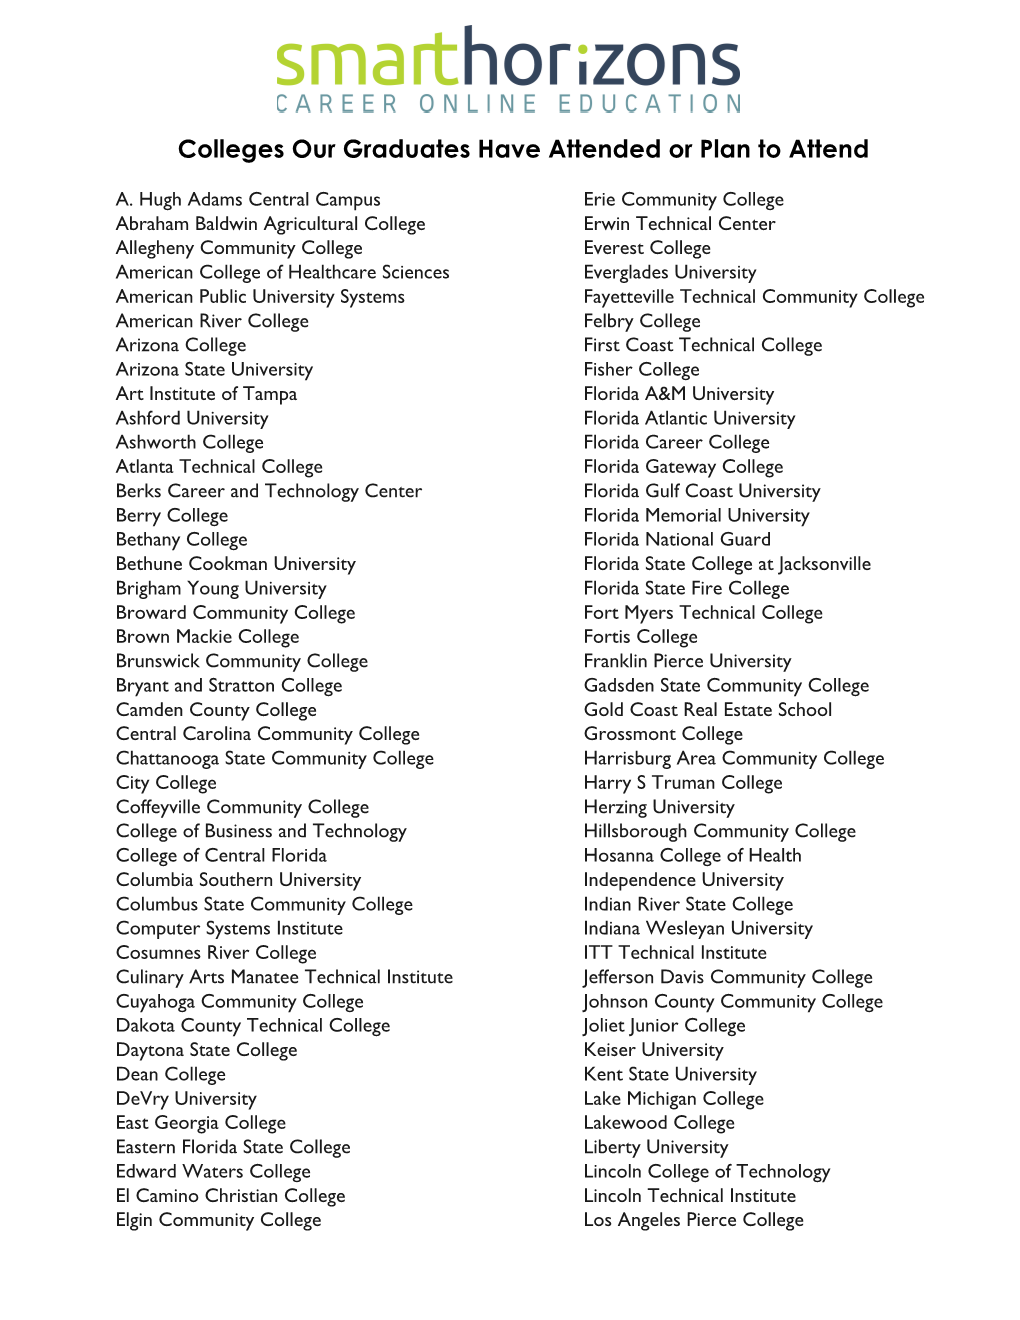 Colleges Our Graduates Have Attended Or Plan to Attend